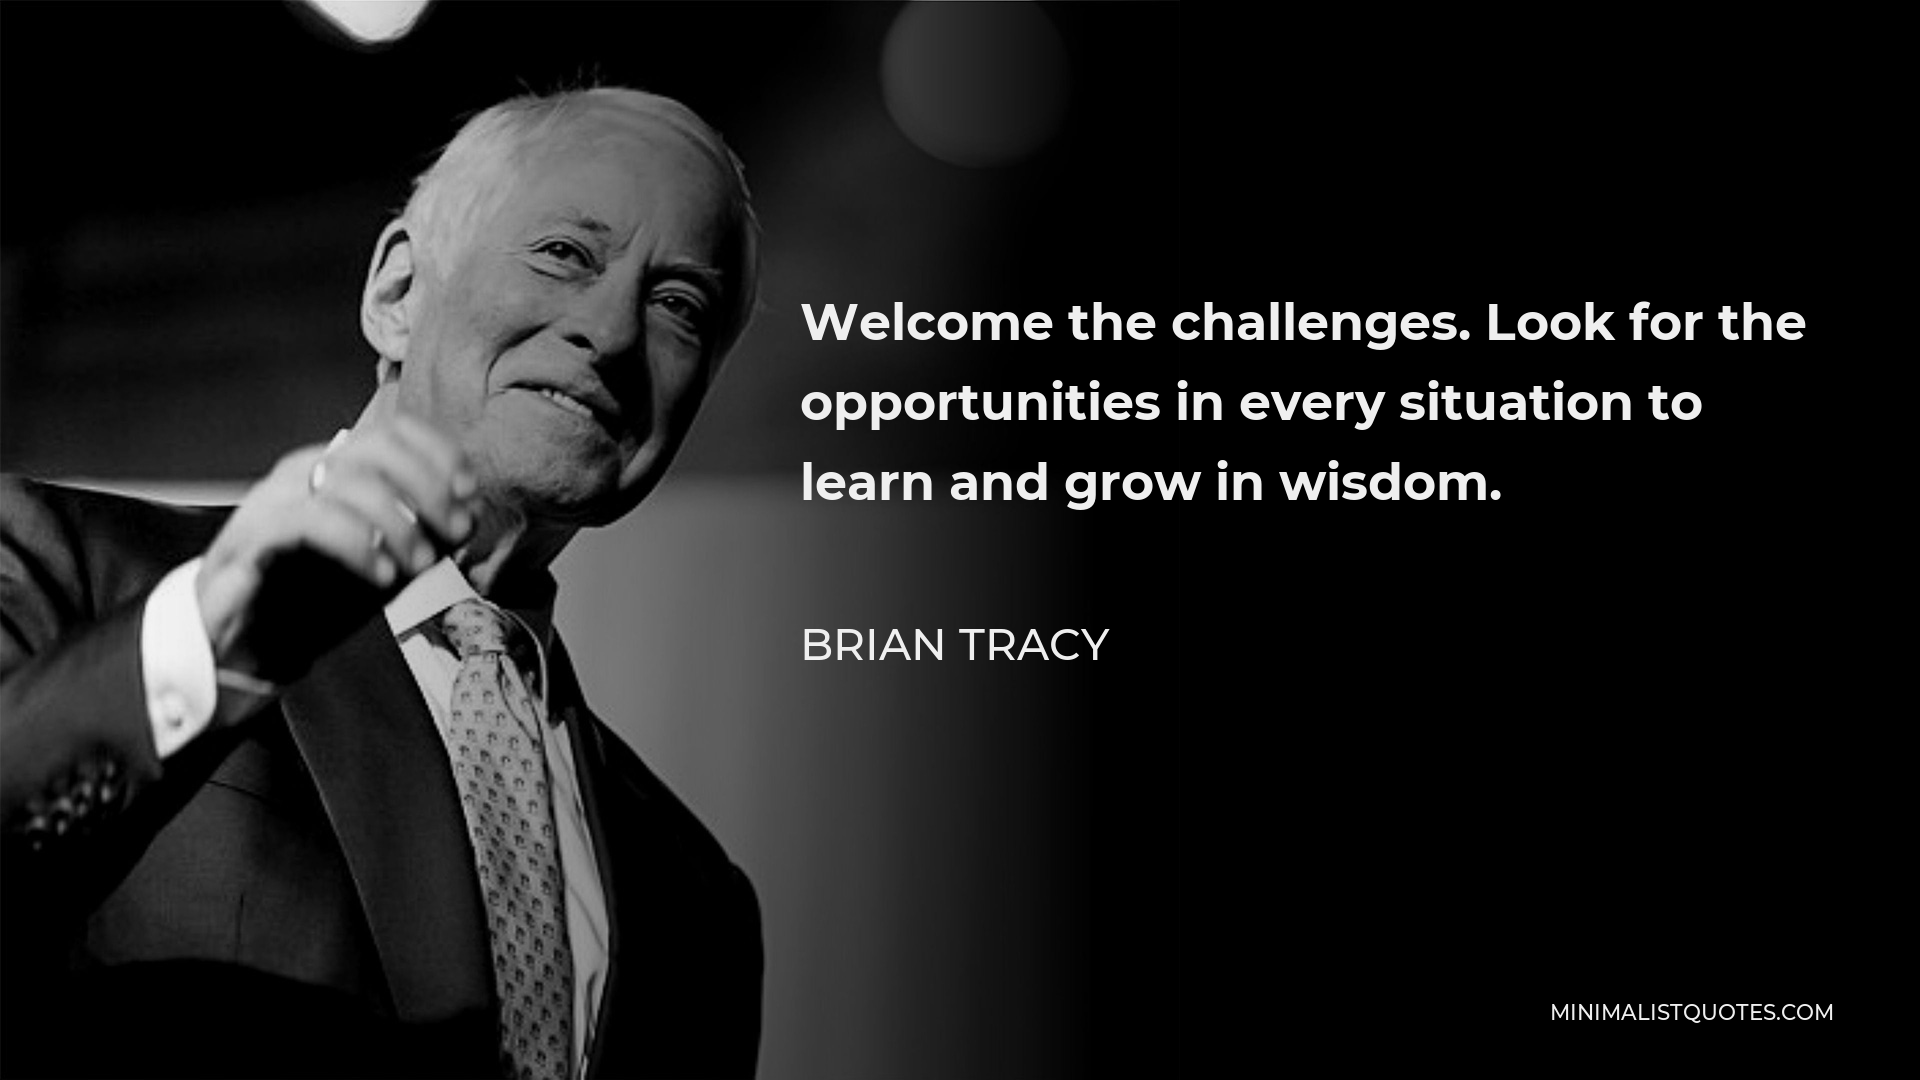 Brian Tracy Quote - Welcome the challenges. Look for the opportunities in every situation to learn and grow in wisdom.